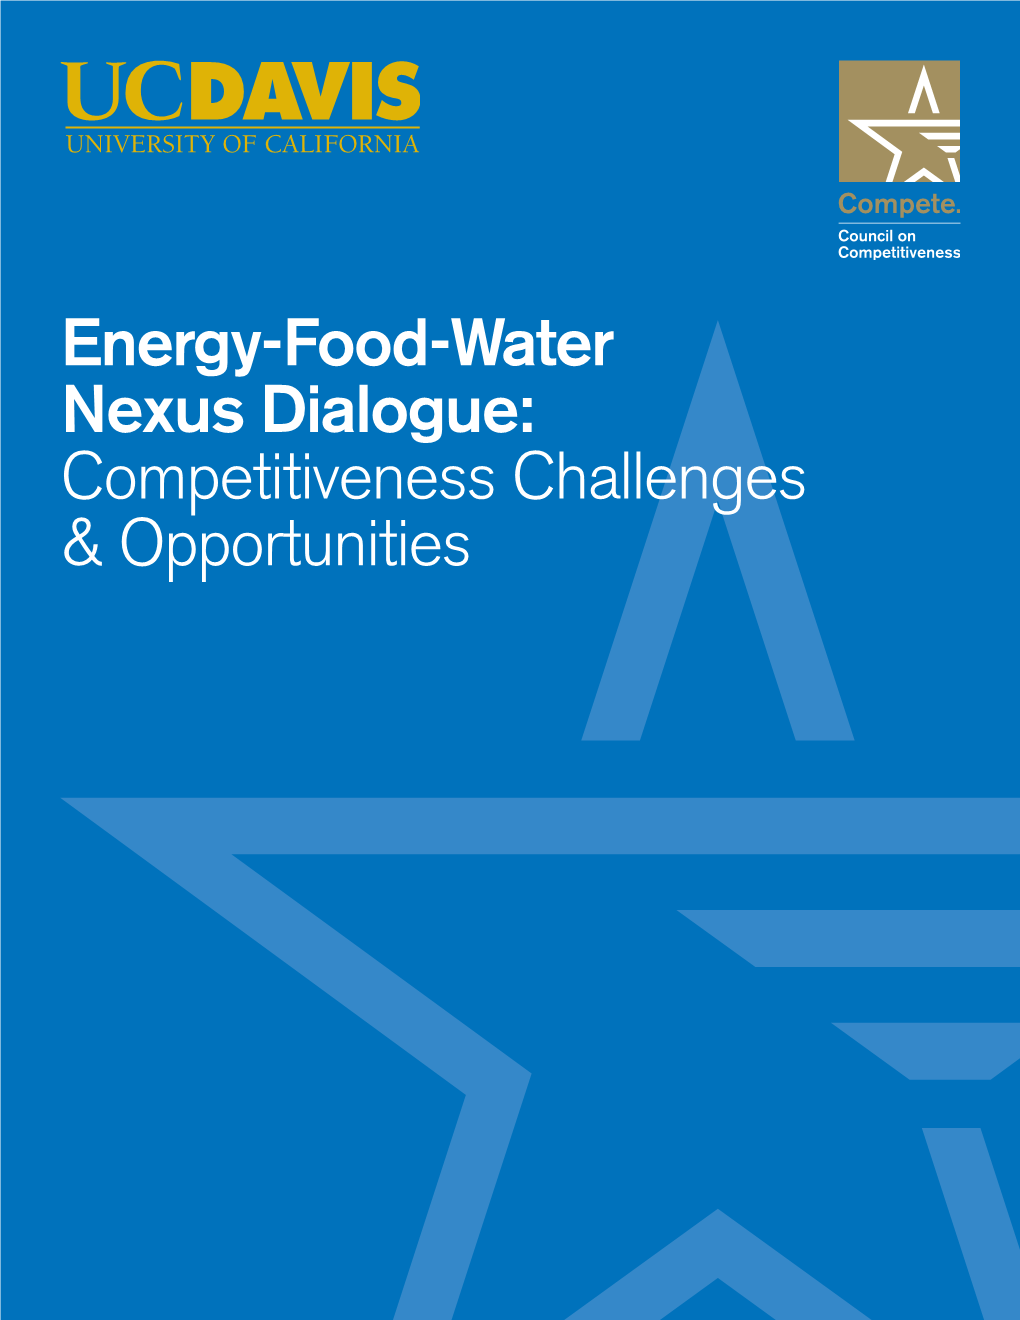 Energy-Food-Water Nexus Dialogue: Competitiveness Challenges & Opportunities 2 Council on Competitiveness 3